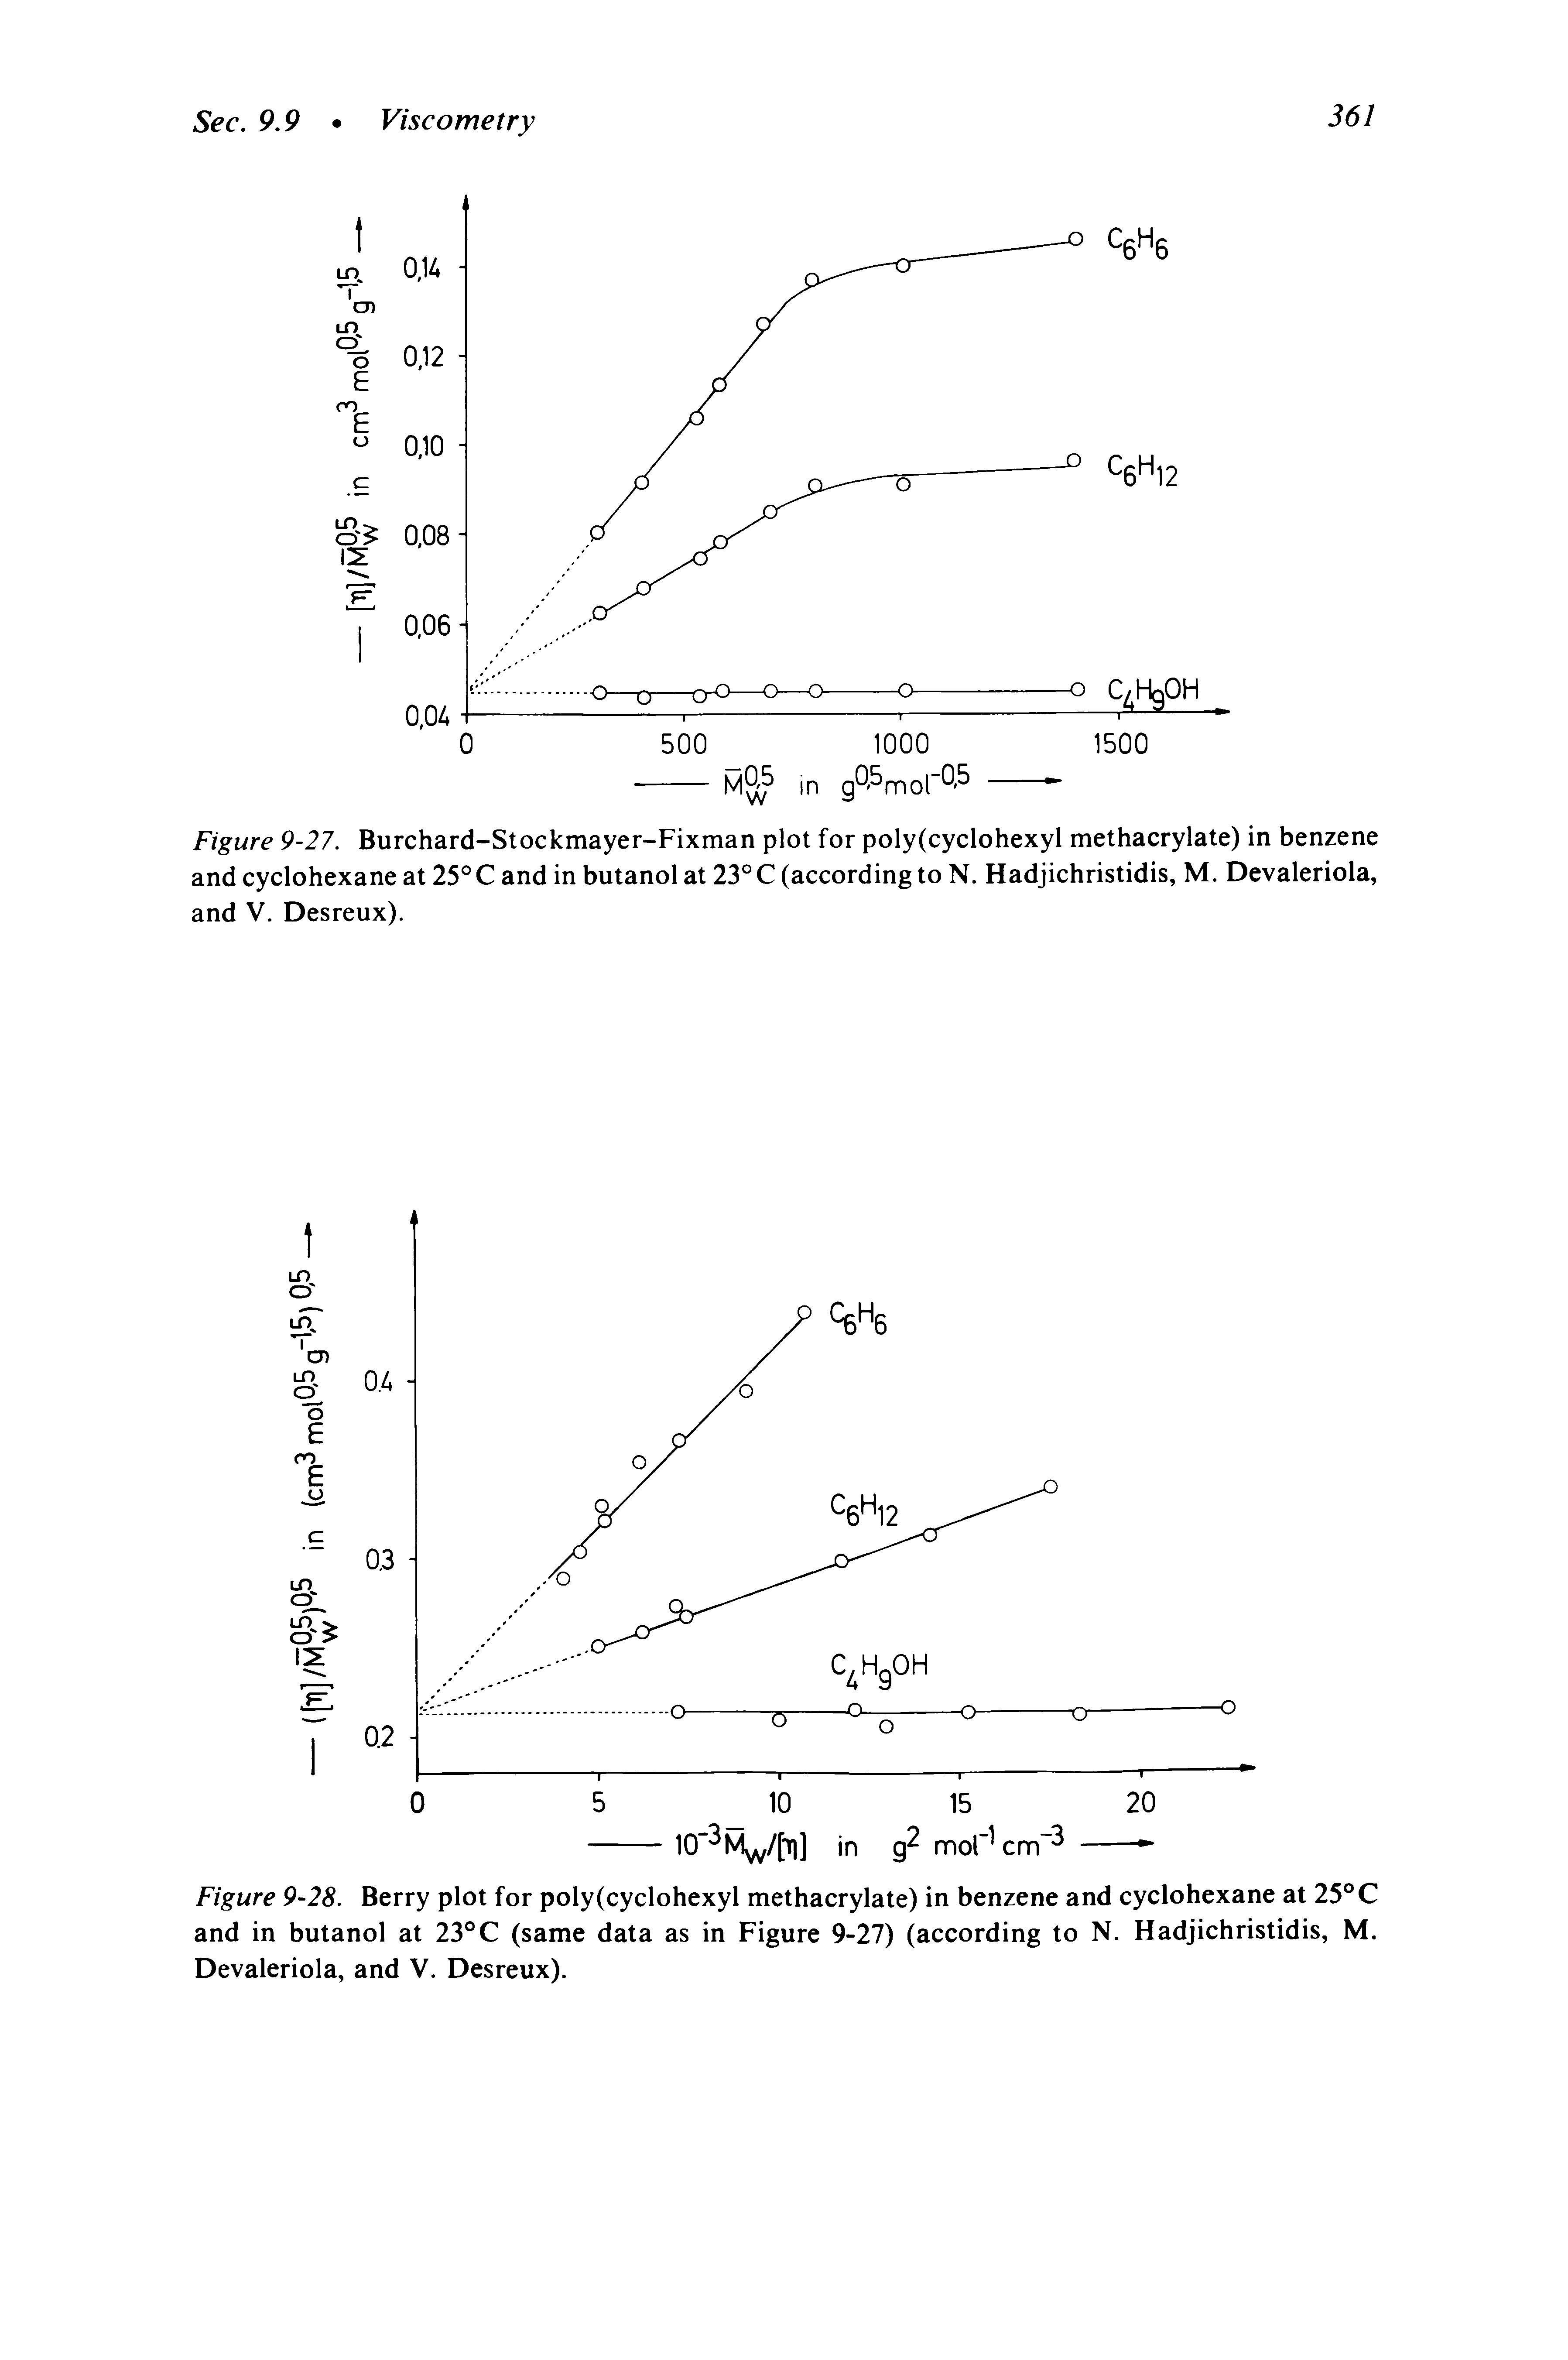 Figure 9-27. Burchard-Stockmayer-Fixman plot for poly(cyclohexyI methacrylate) in benzene and cyclohexane at 25° C and in butanol at 23° C (according to N. Hadjichristidis, M. Devaleriola, and V. Desreux).